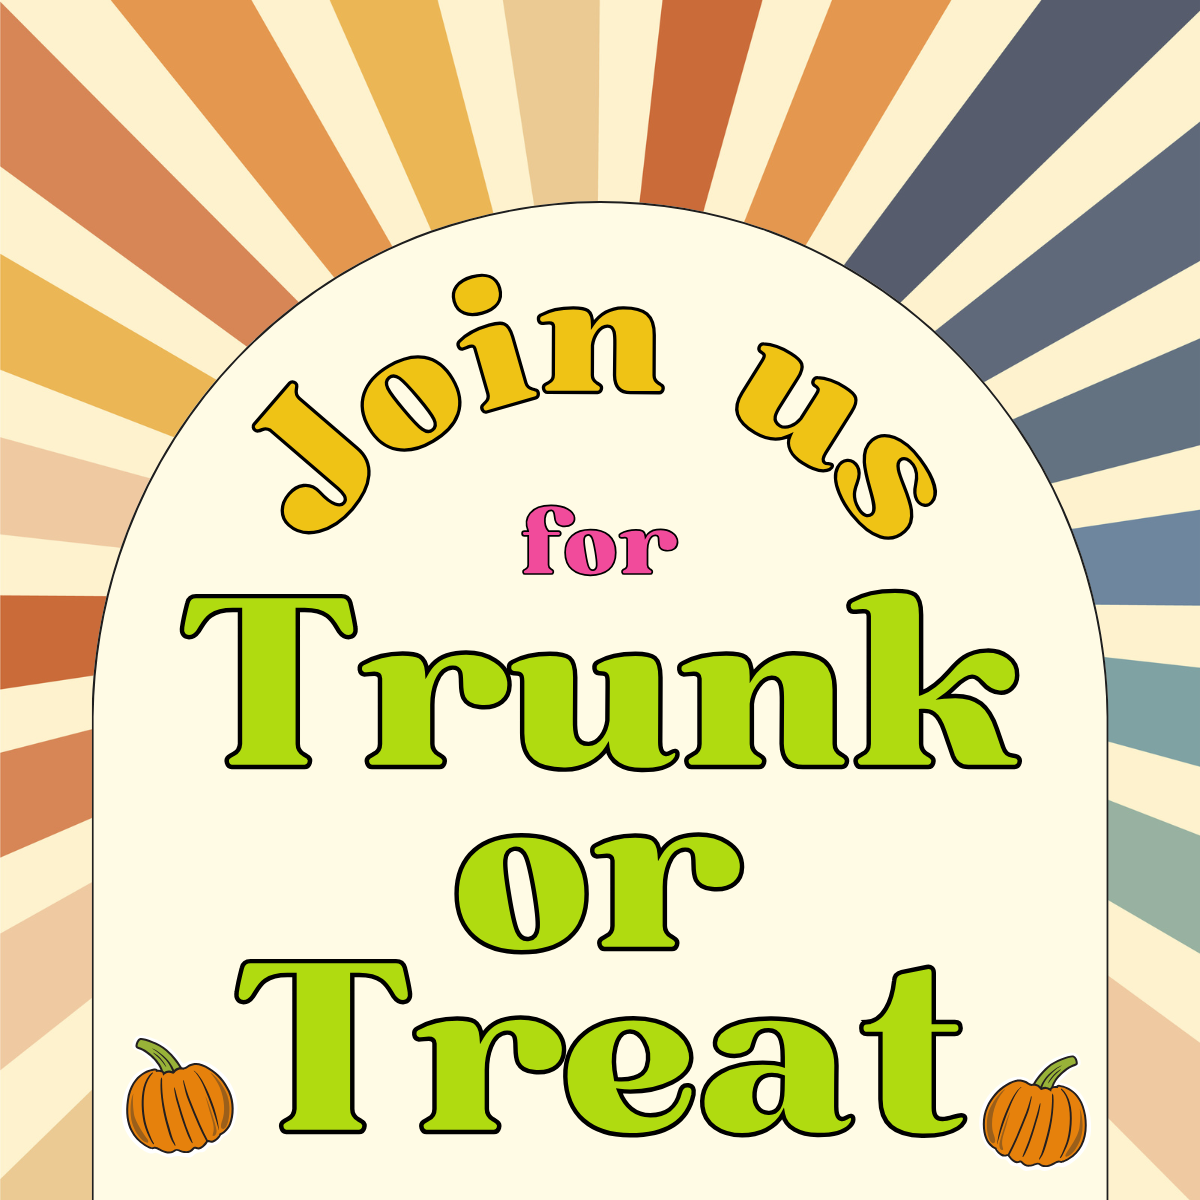 Join us for Trunk or Treat